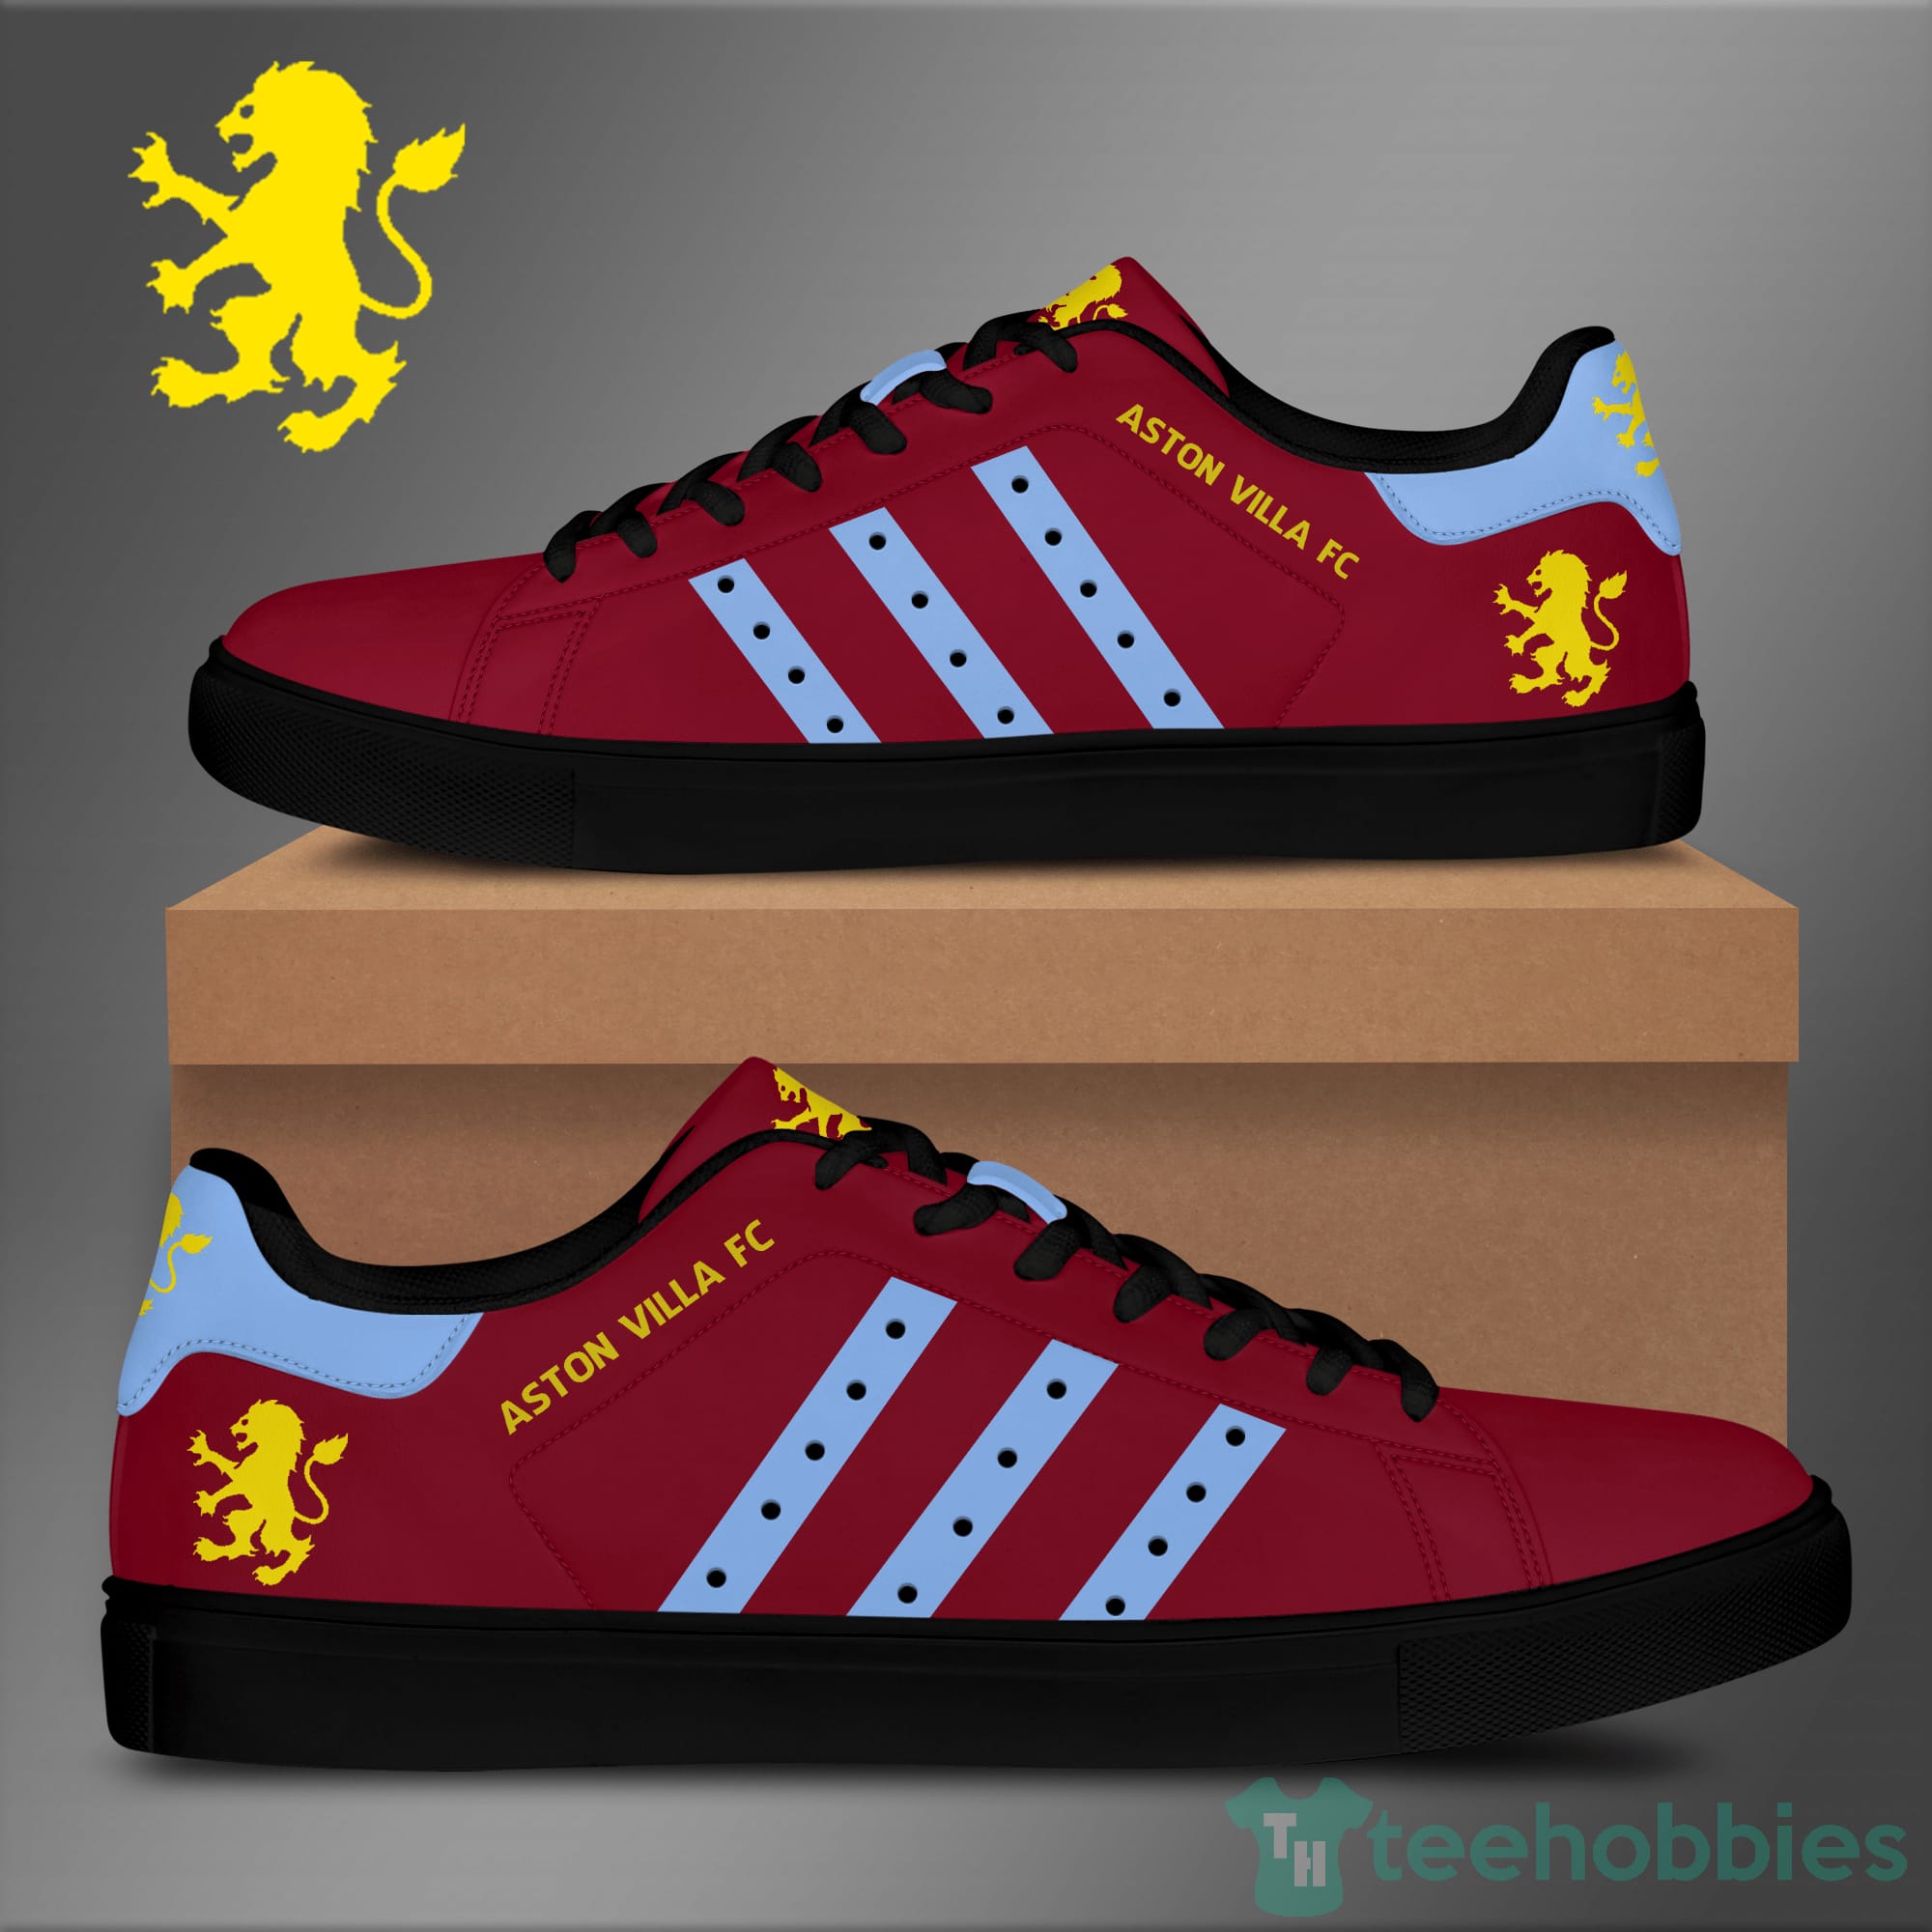 Aston Villa Fc Red Low Top Skate Shoes Product photo 2